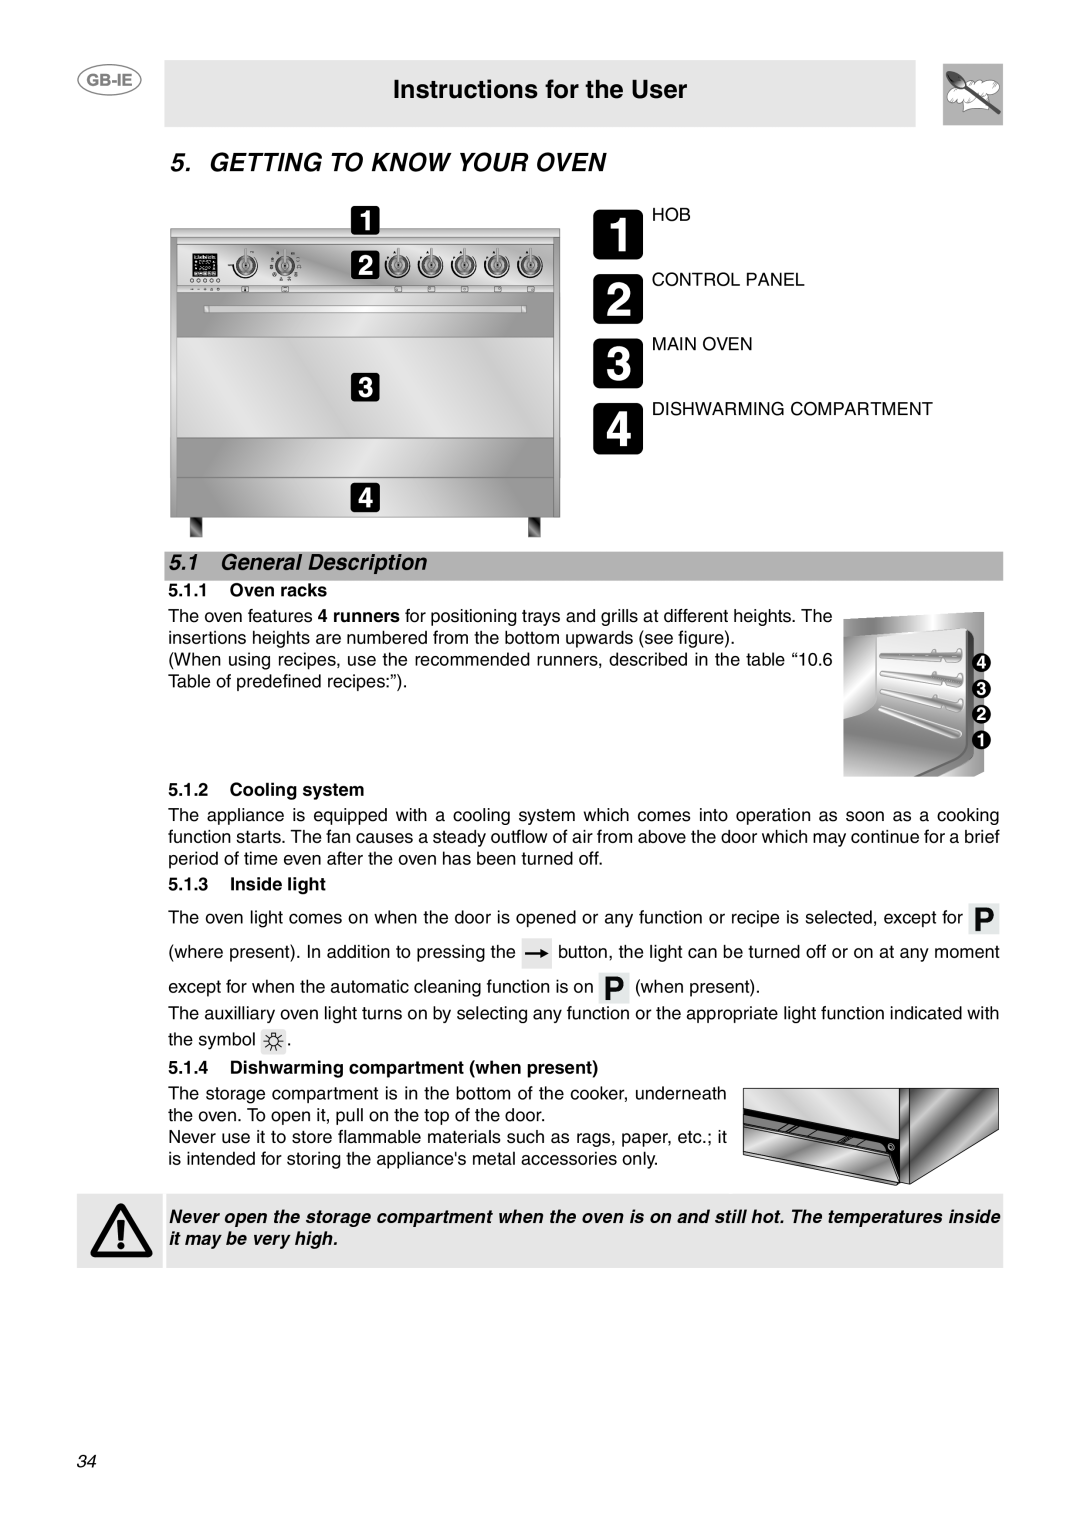 Smeg CE9IMX manual Instructions for the User, Getting To Know Your Oven, General Description, Oven racks, Cooling system 